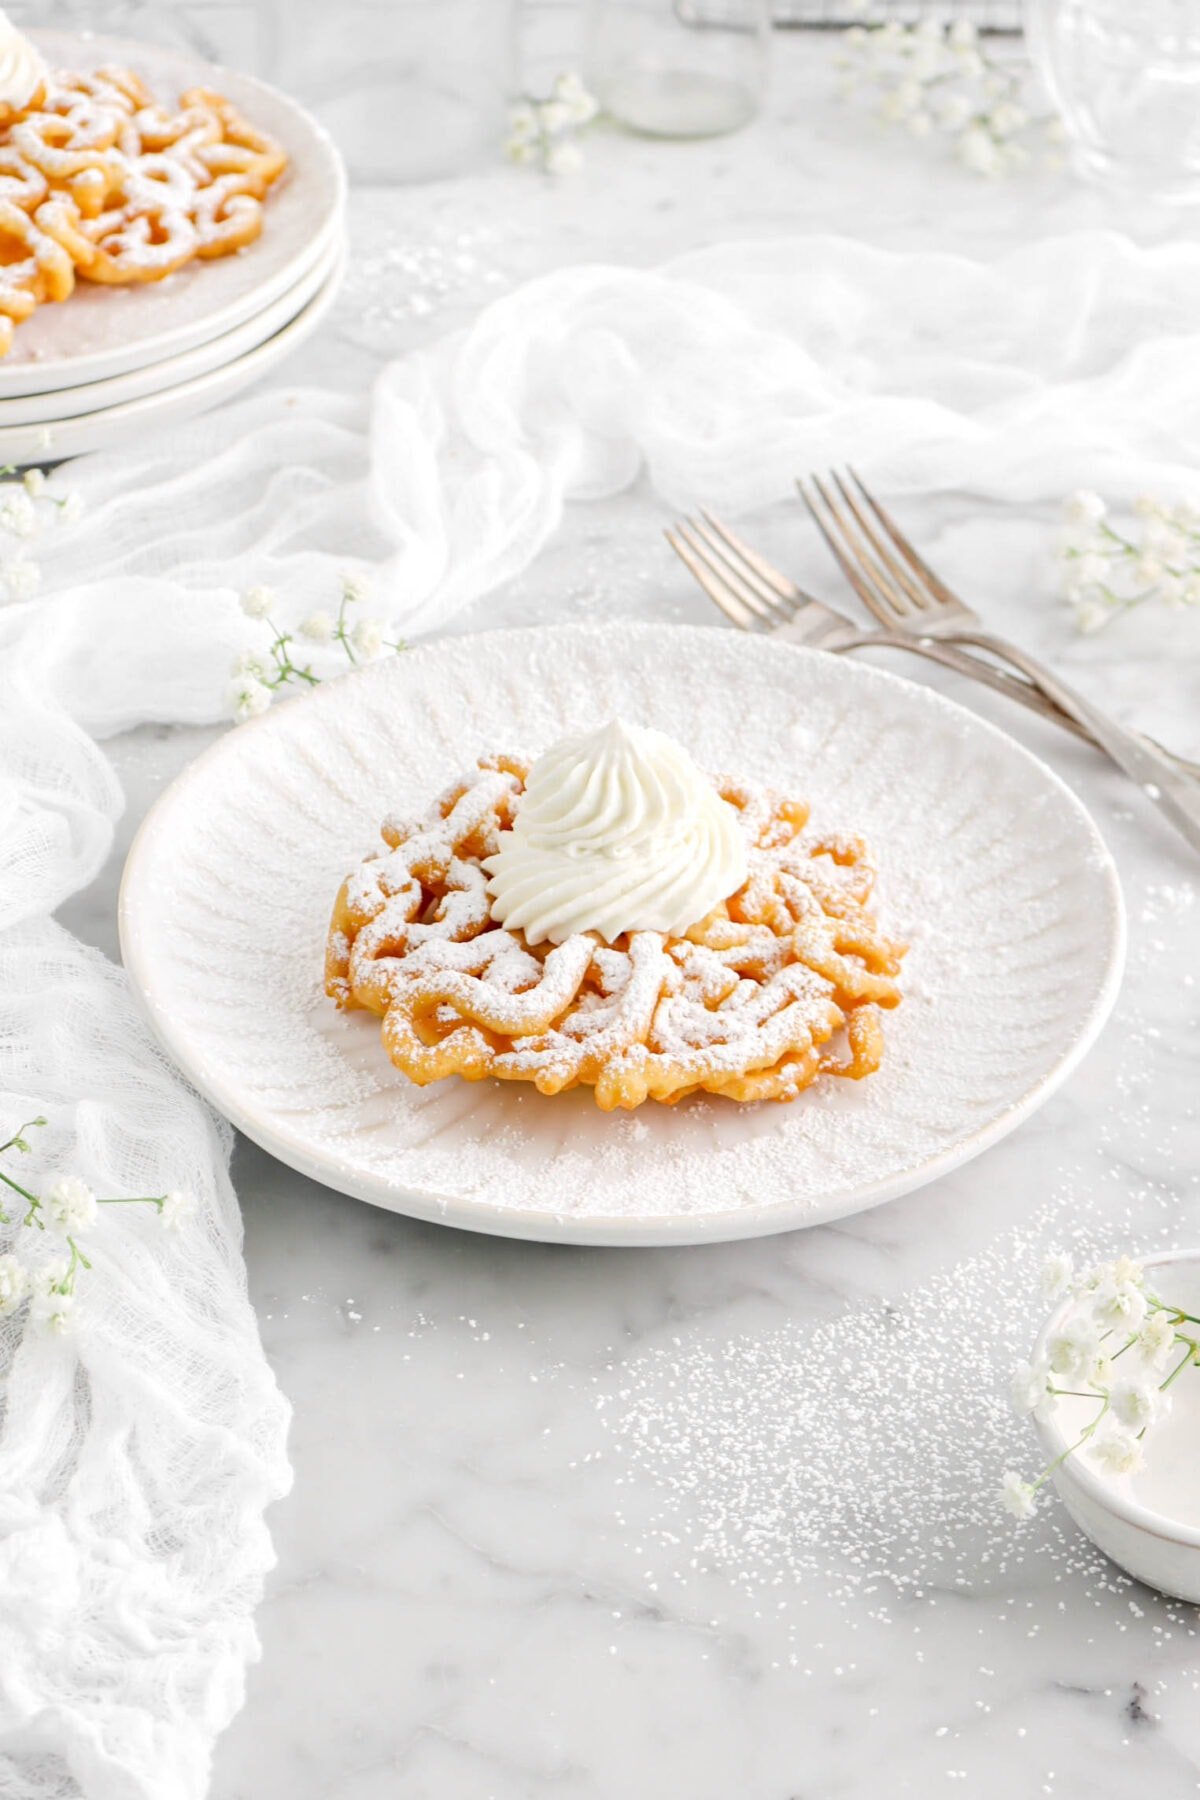 funnel cake with piped whipped cream and powdered sugar on top with white cheese cloth, flowers, and forks beside